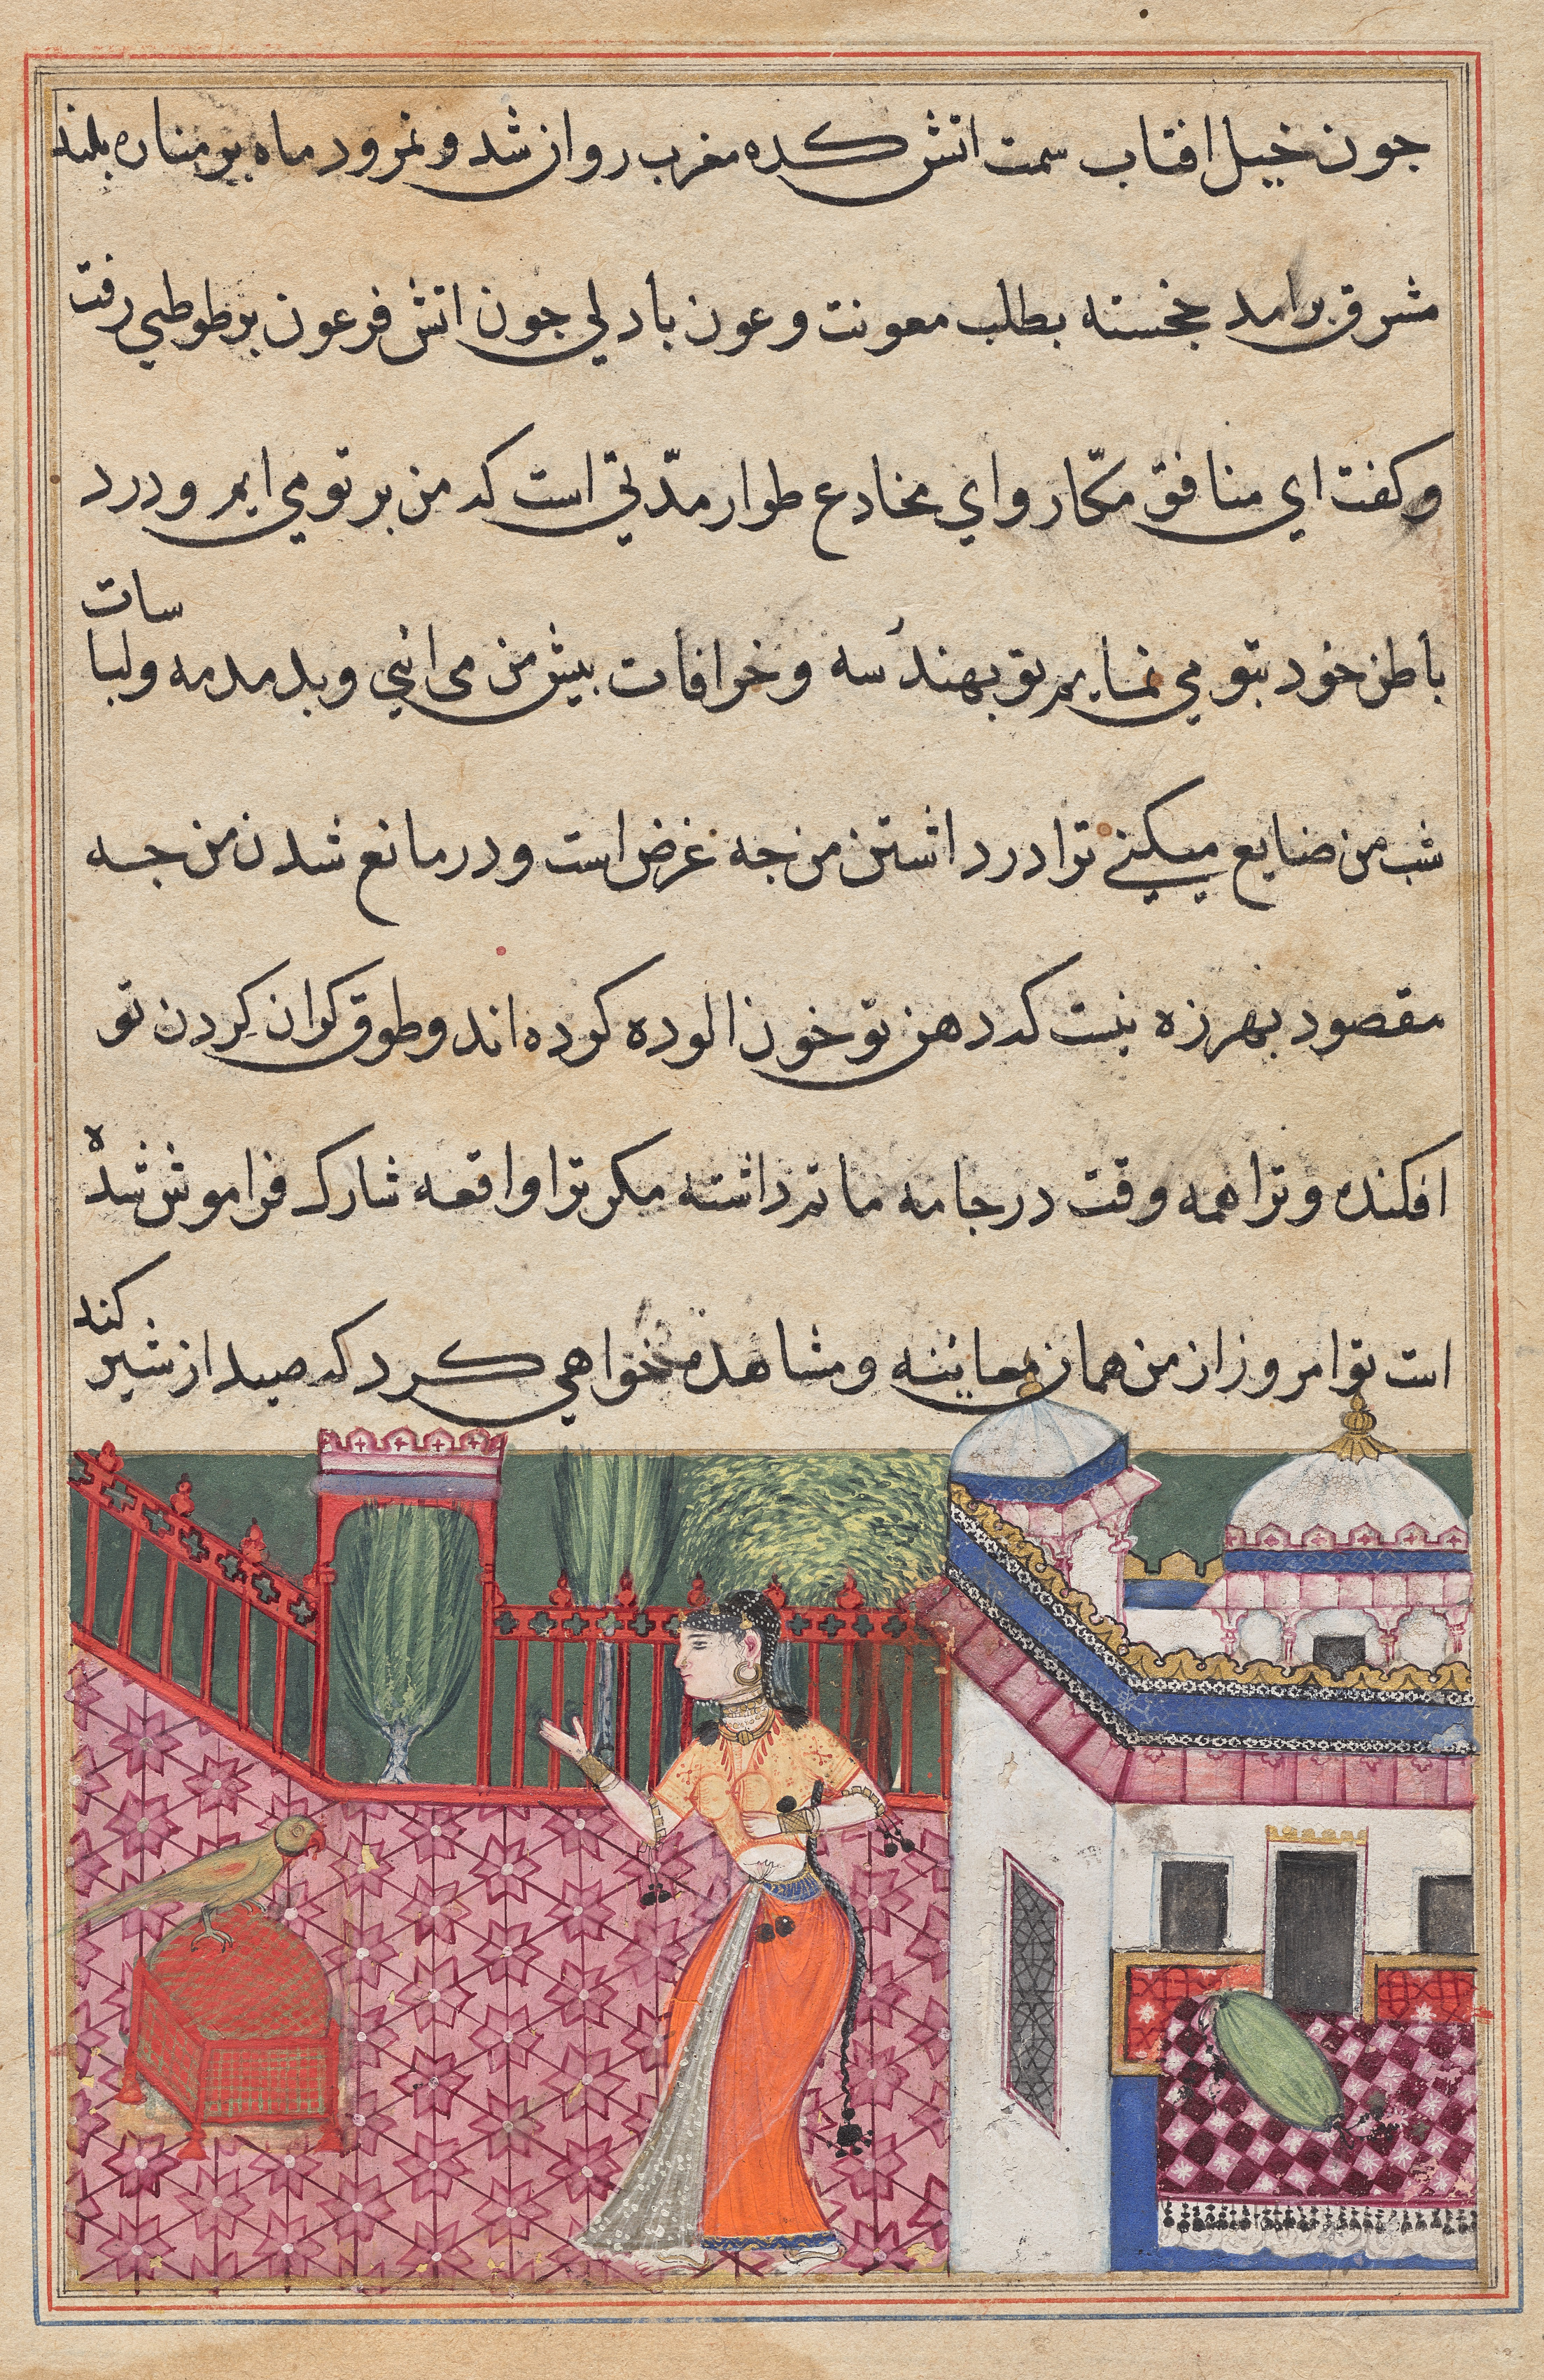 The parrot addresses Khujasta at the beginning of the thirty-third night, from a Tuti-nama (Tales of a Parrot)